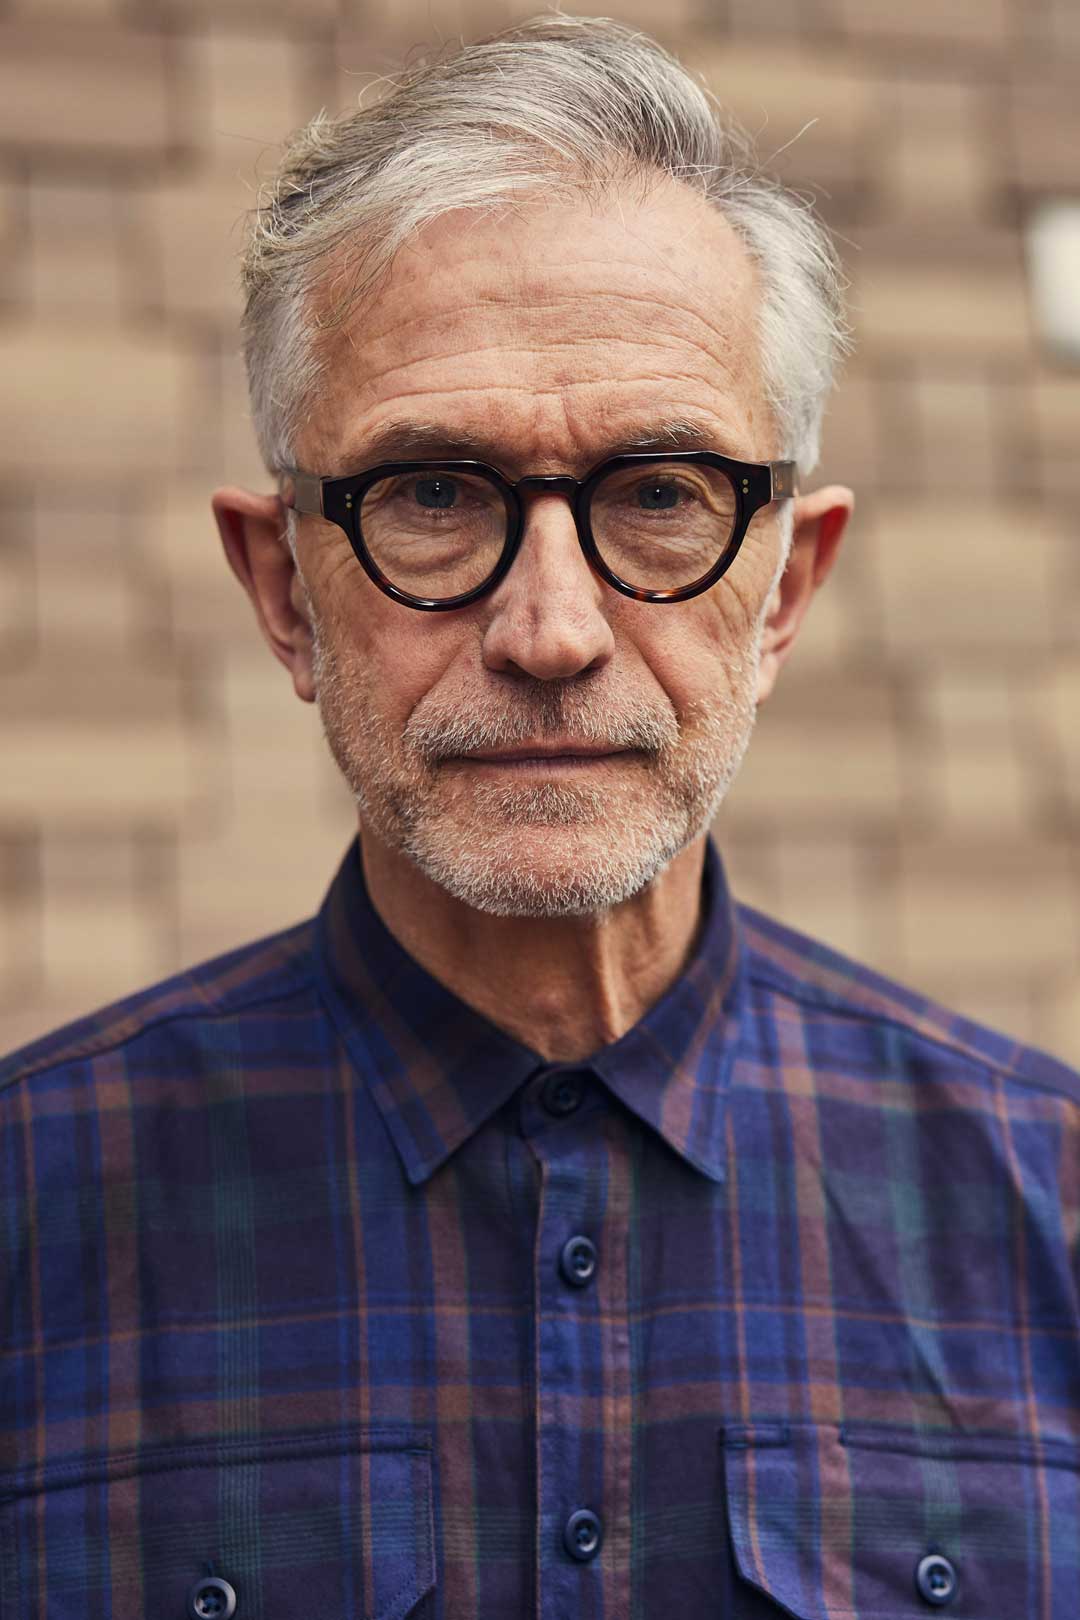 Grey haired man wearing blue shirt and thick eyeglasses frame outside in street